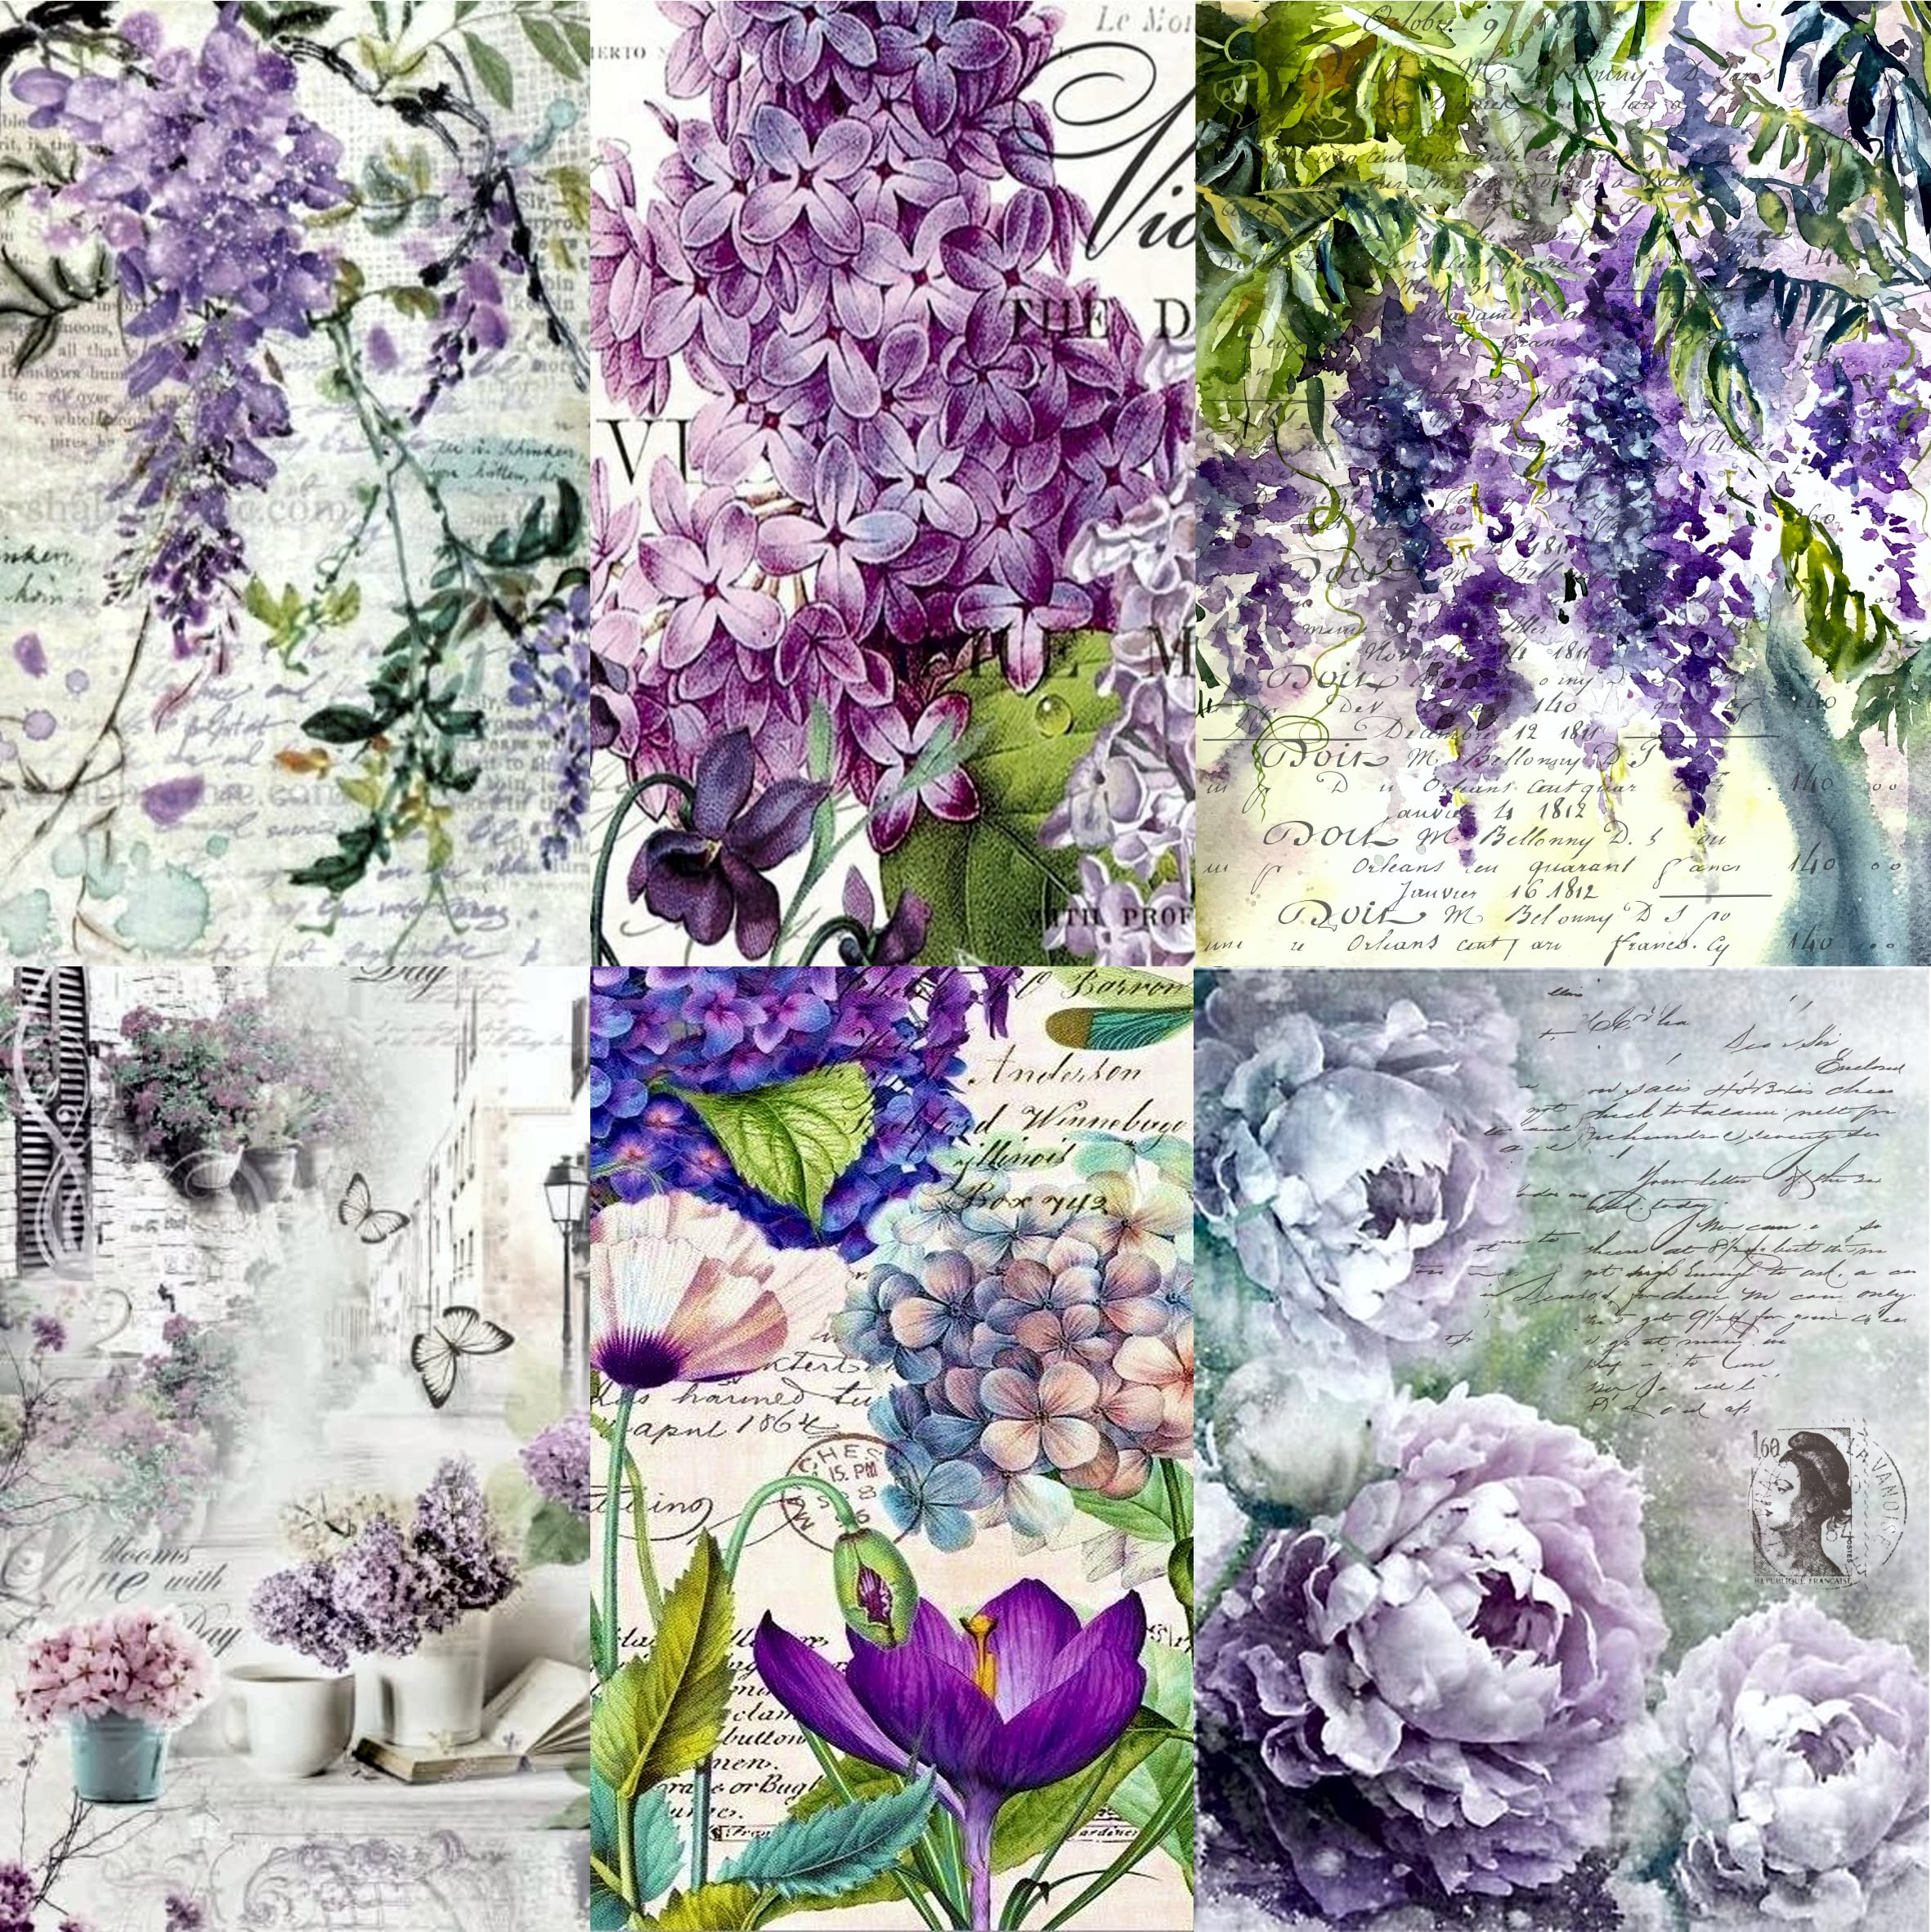 Victorian Floral Mulberry Rice Paper, 8 x 10.5 inch - 6 Unique Printed Mulberry Paper Images 30gsm Visible Fibres for Decoupage Crafts Mixed Media